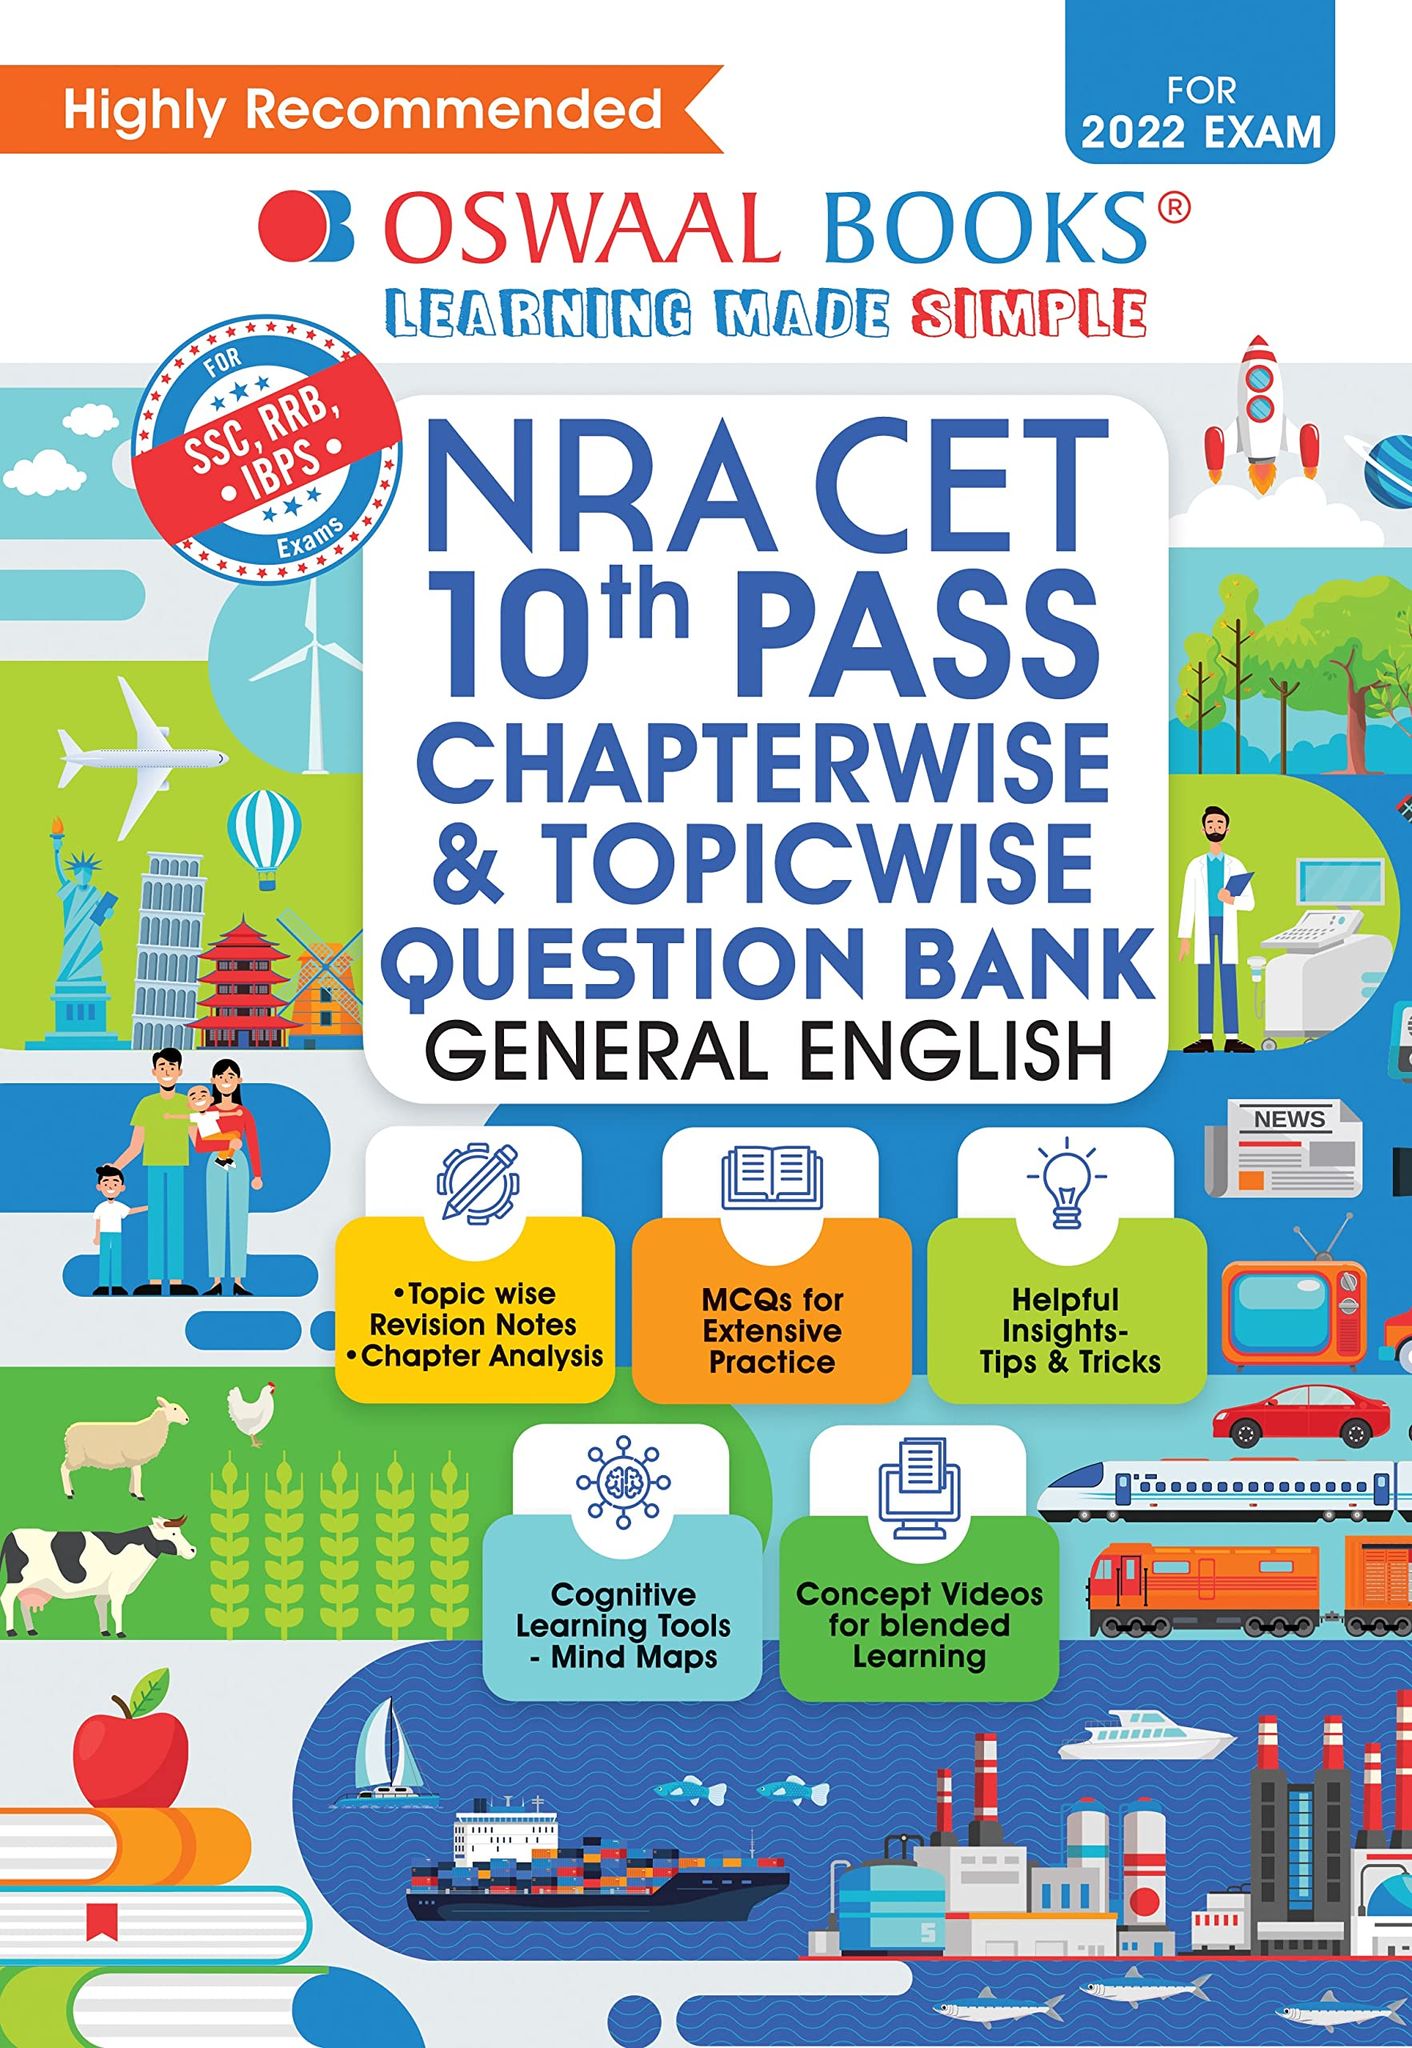 Oswaal NRA CET 10th Pass Chapterwise & Topicwise Question Bank, General English (For 2022 Exam) For SSC, IBPS & RRB Level I to III Recruitment Exams [Paperback] Oswaal Editorial Board